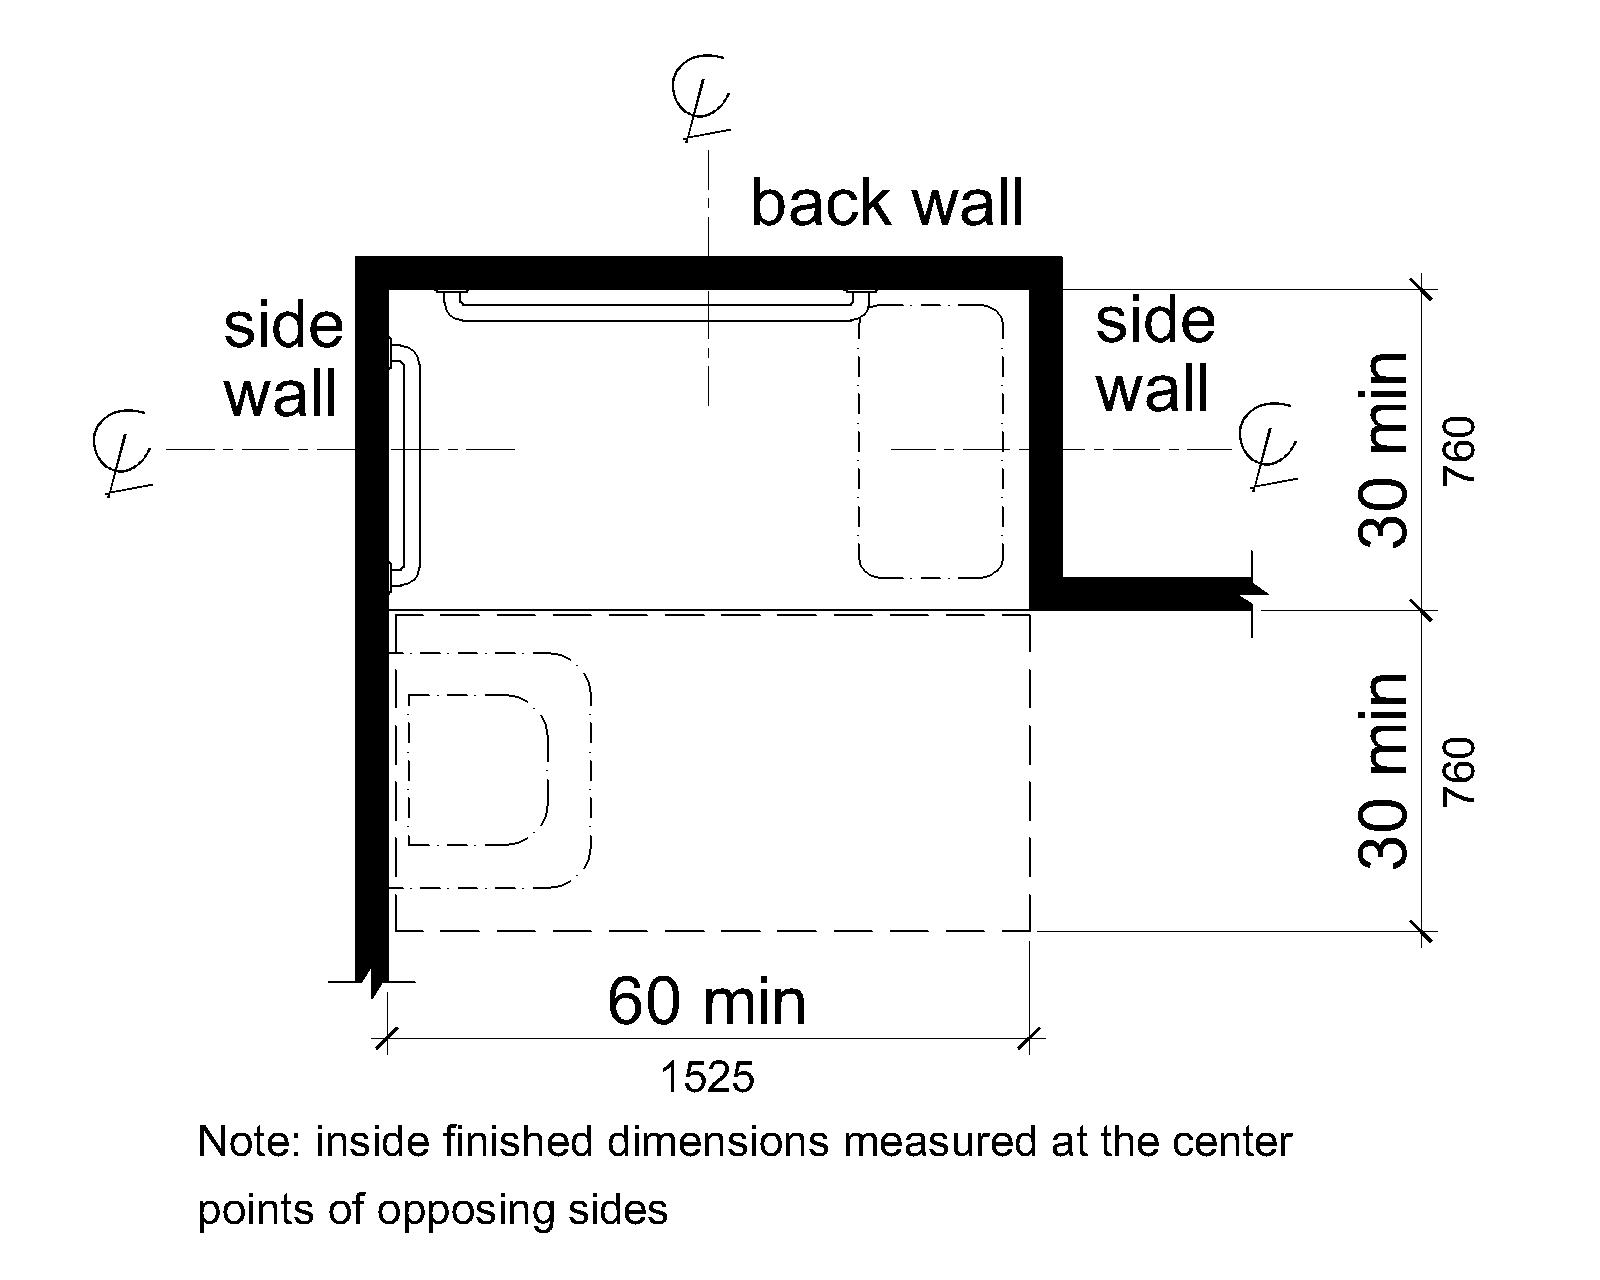 A plan view shows the shower compartment is 30 inches (760 mm) minimum by 60 inches (1525 mm) minimum with a 60 inch (1525 mm) wide entry on the face of the compartment. A clear deck space 30 inches (760 mm) side is provided adjacent to the open face of the compartment. A seat is shown on one end.  A lavatory is permitted within the clear deck space on the end opposite the seat.